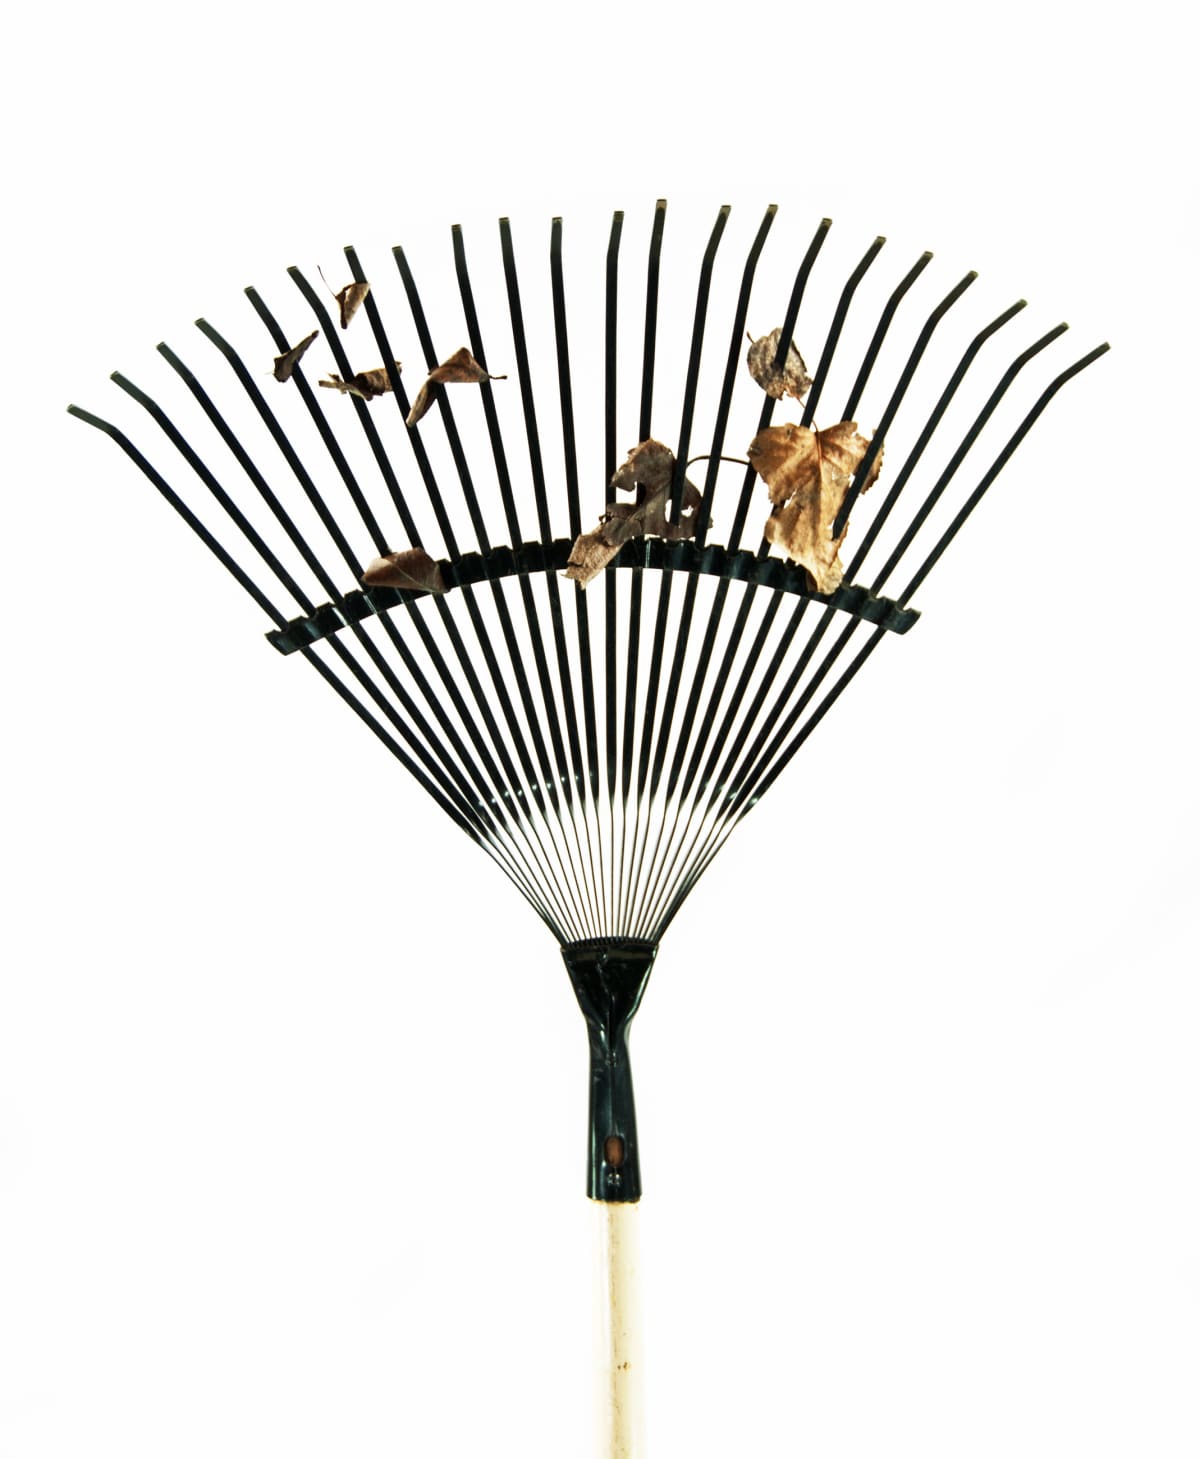 A garden rake with dried leaves